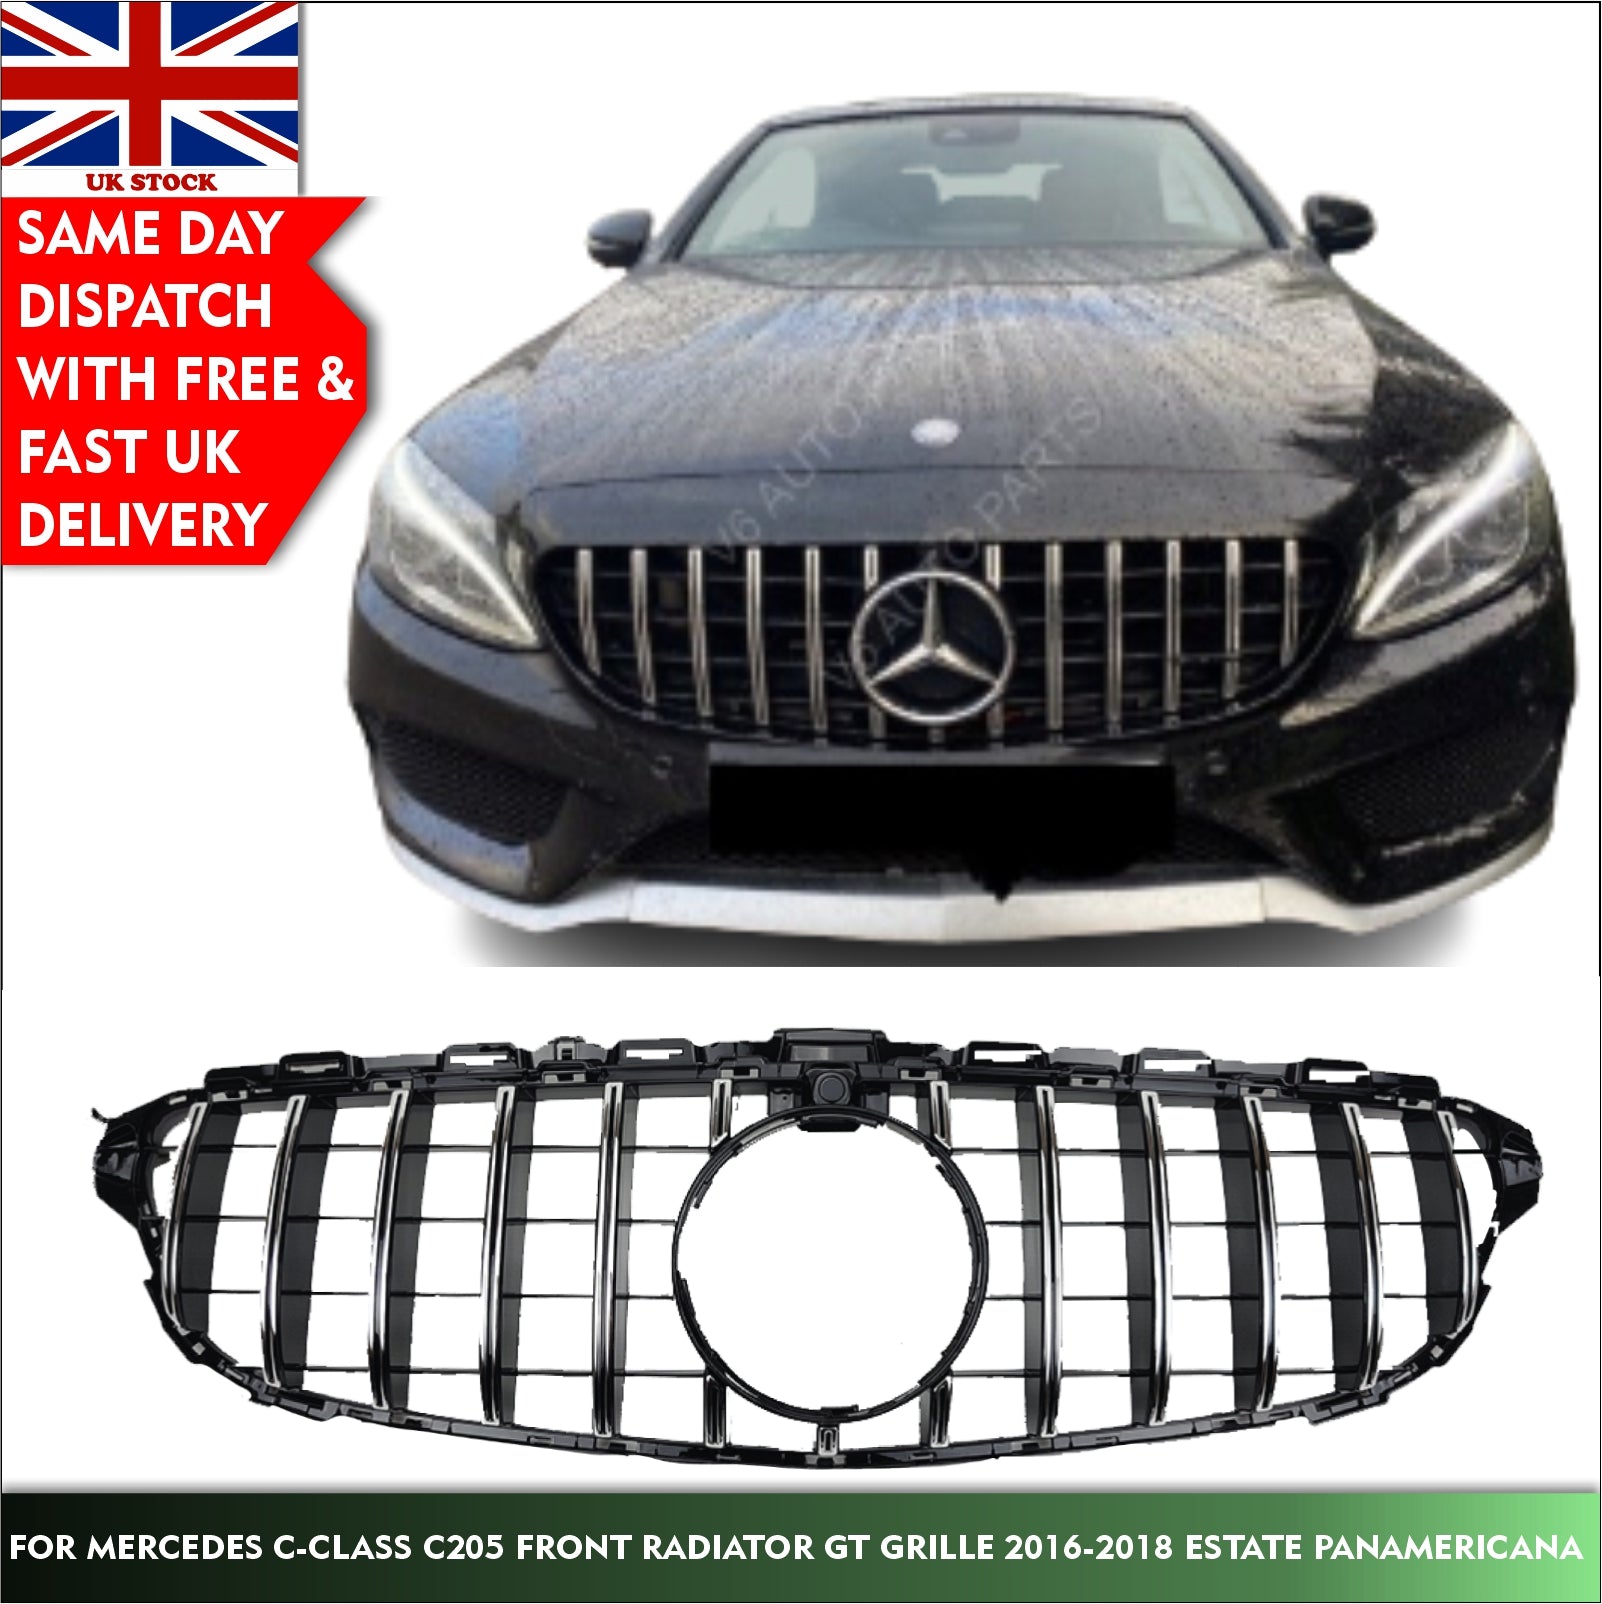 For Mercedes C-Class C205 Front Radiator GT Grille Coupe Panamericana 2015-2018